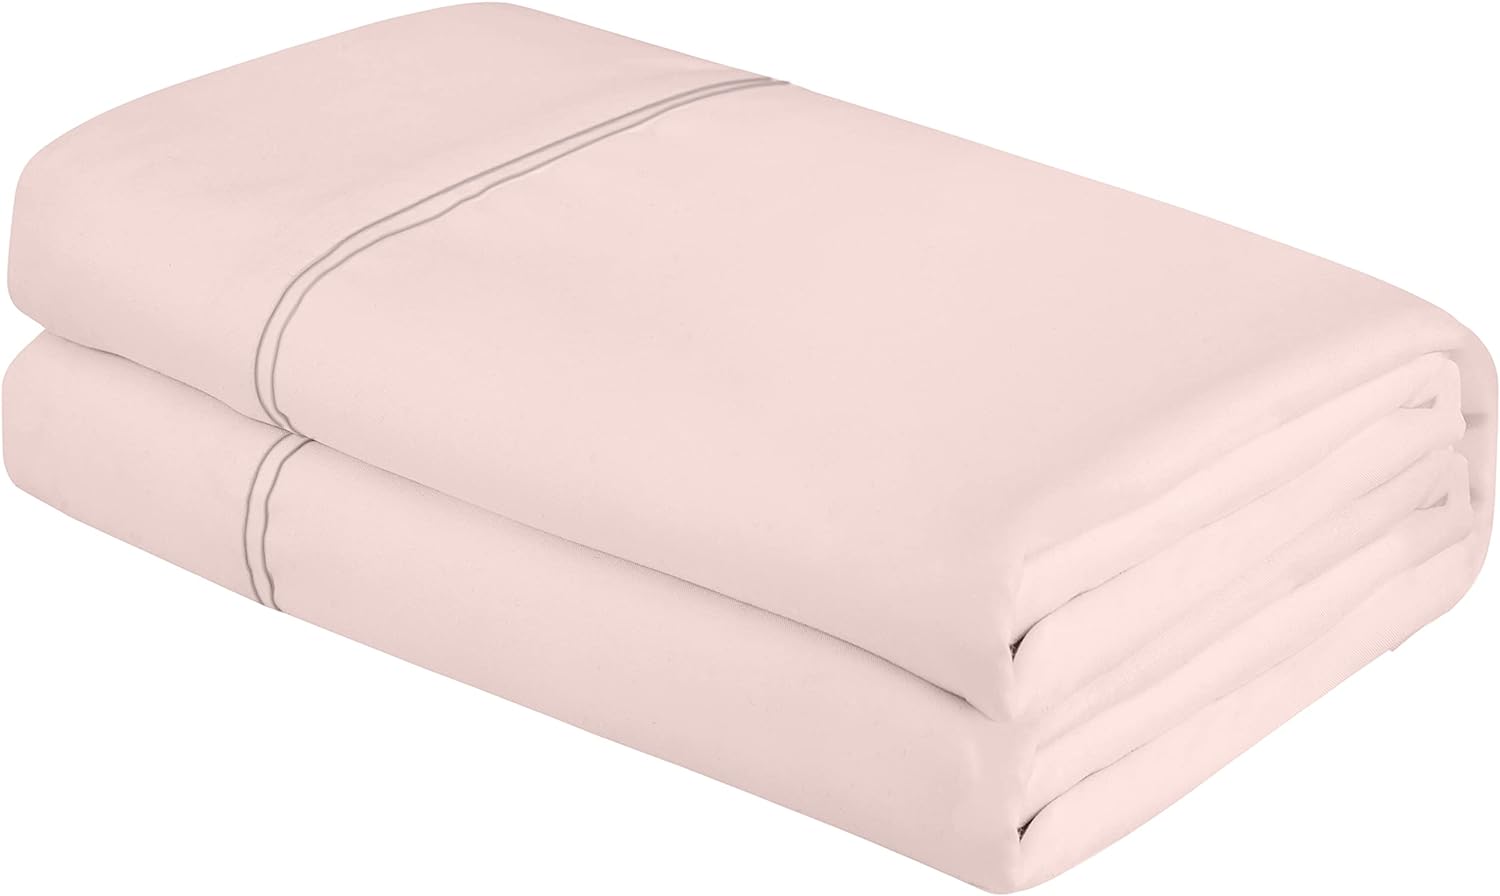 ROYALE LINENS Queen Size Flat Sheet Only - Brushed 1800 Microfiber - Ultra Soft & Breathable - Wrinkle & Stain Resistant - Hotel Quality Flat Sheet Sold Separately - Top Sheet for Bed - (Queen, Pink)